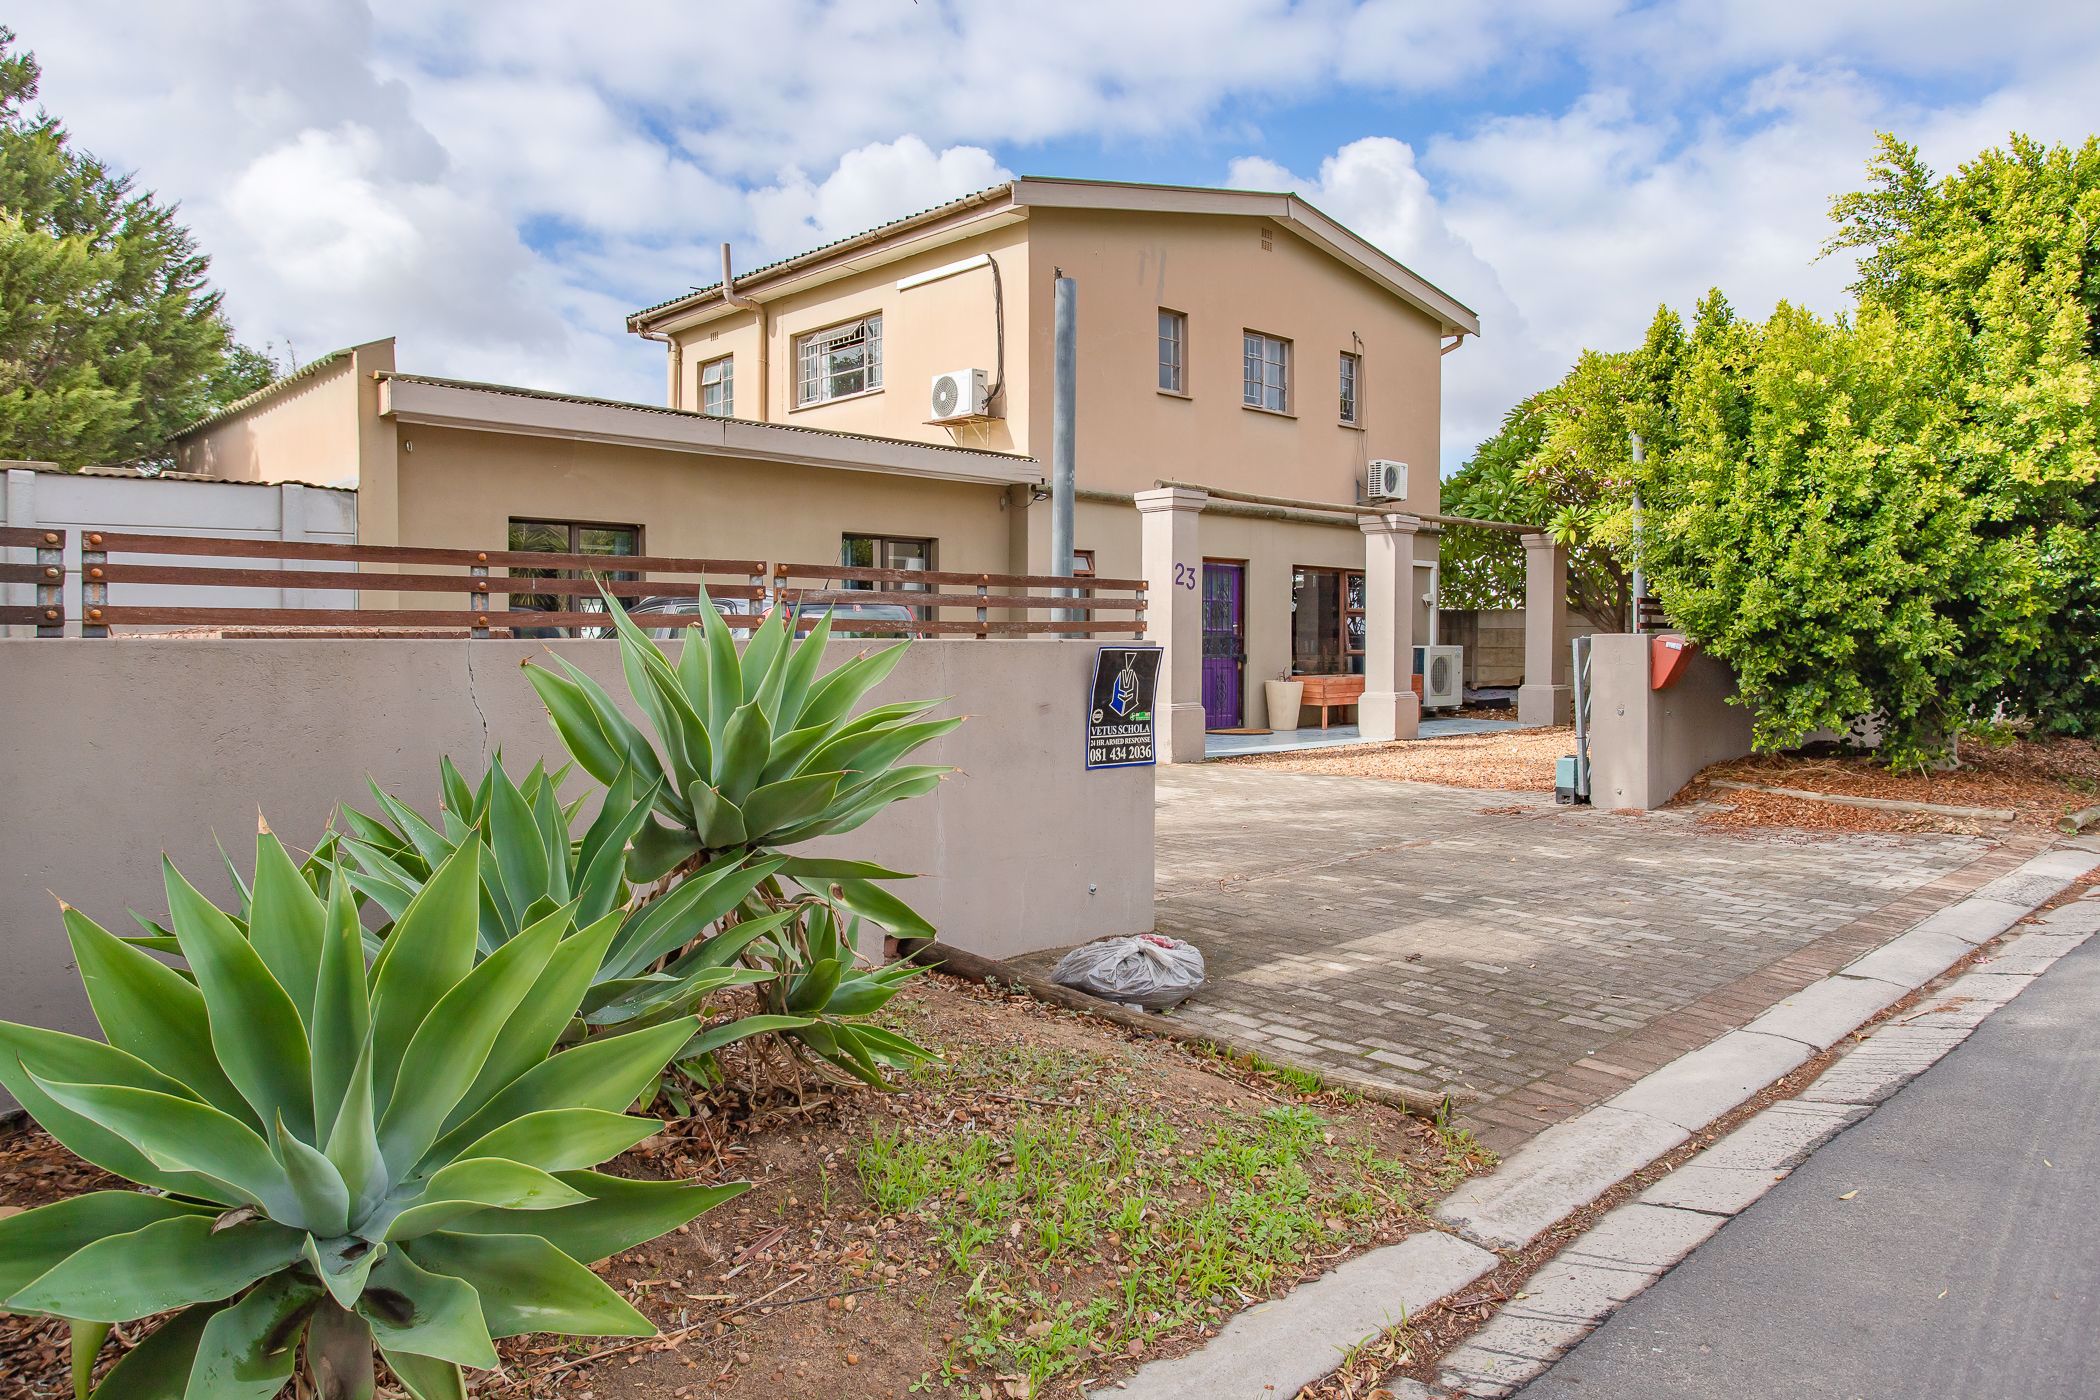 3 bedroom house for sale in Paarl North